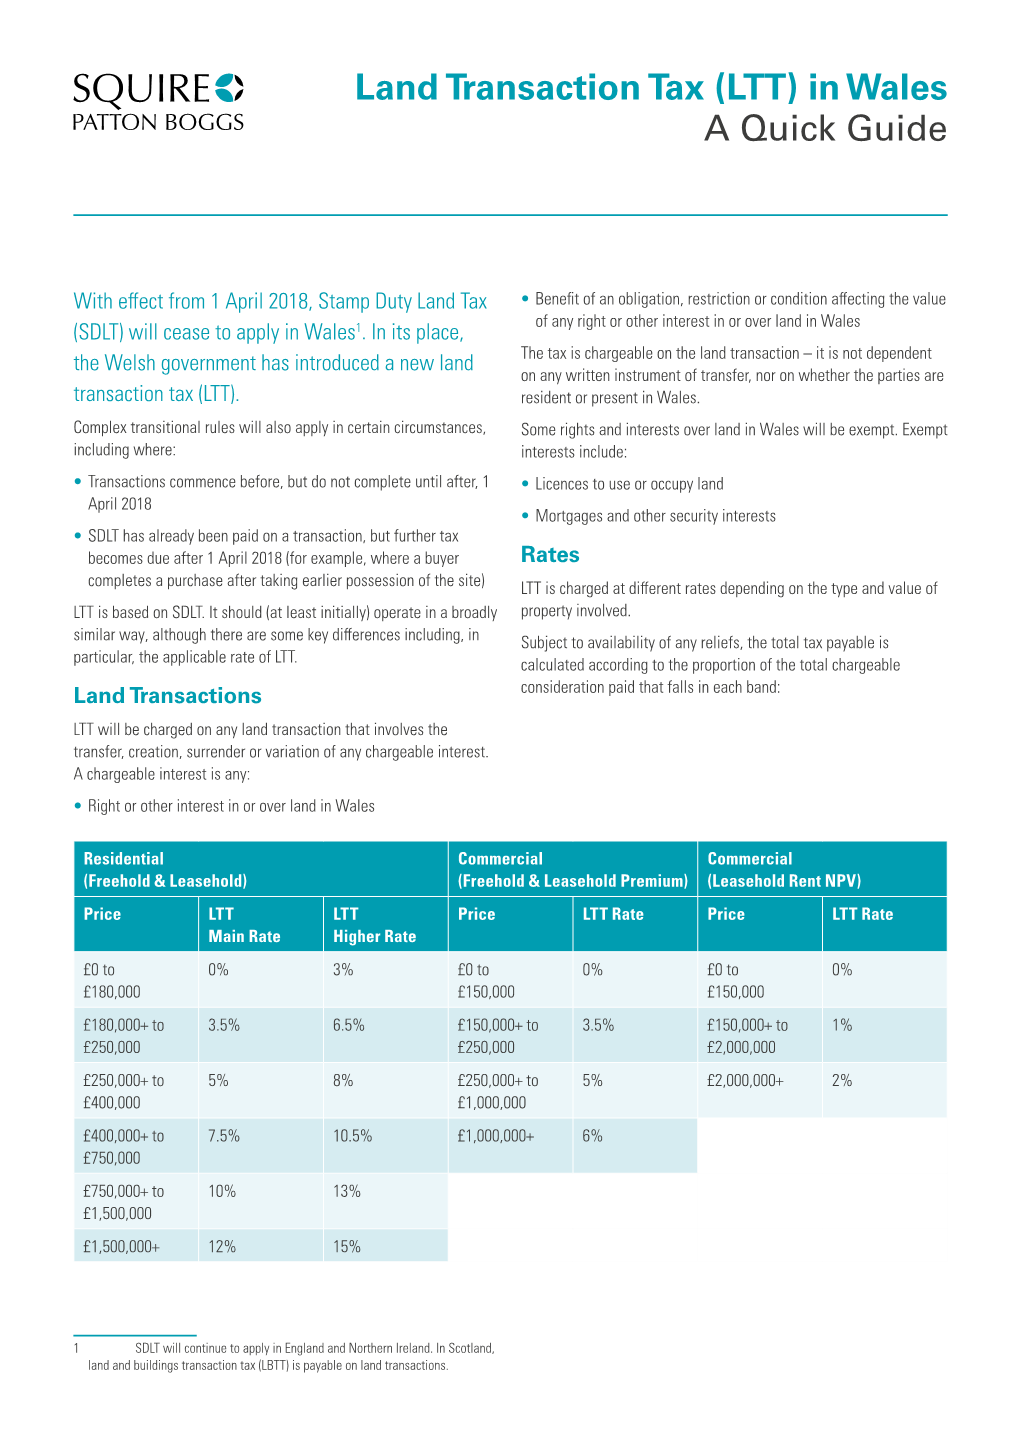 Land Transaction Tax (LTT) in Wales a Quick Guide